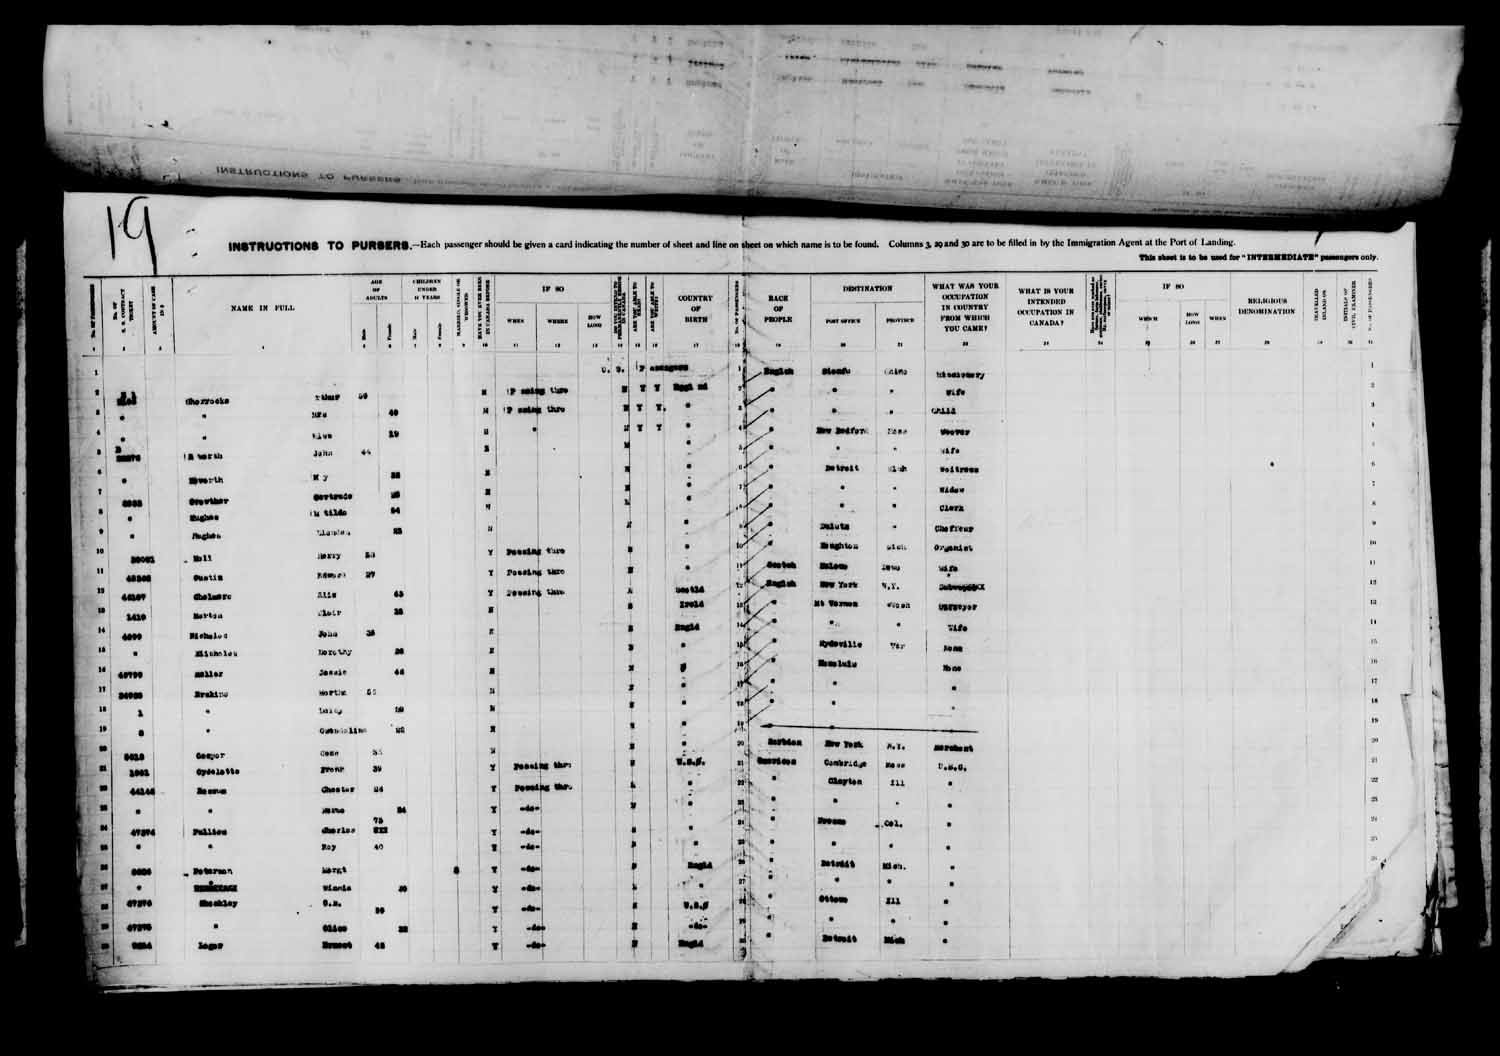 Digitized page of Passenger Lists for Image No.: e003610626